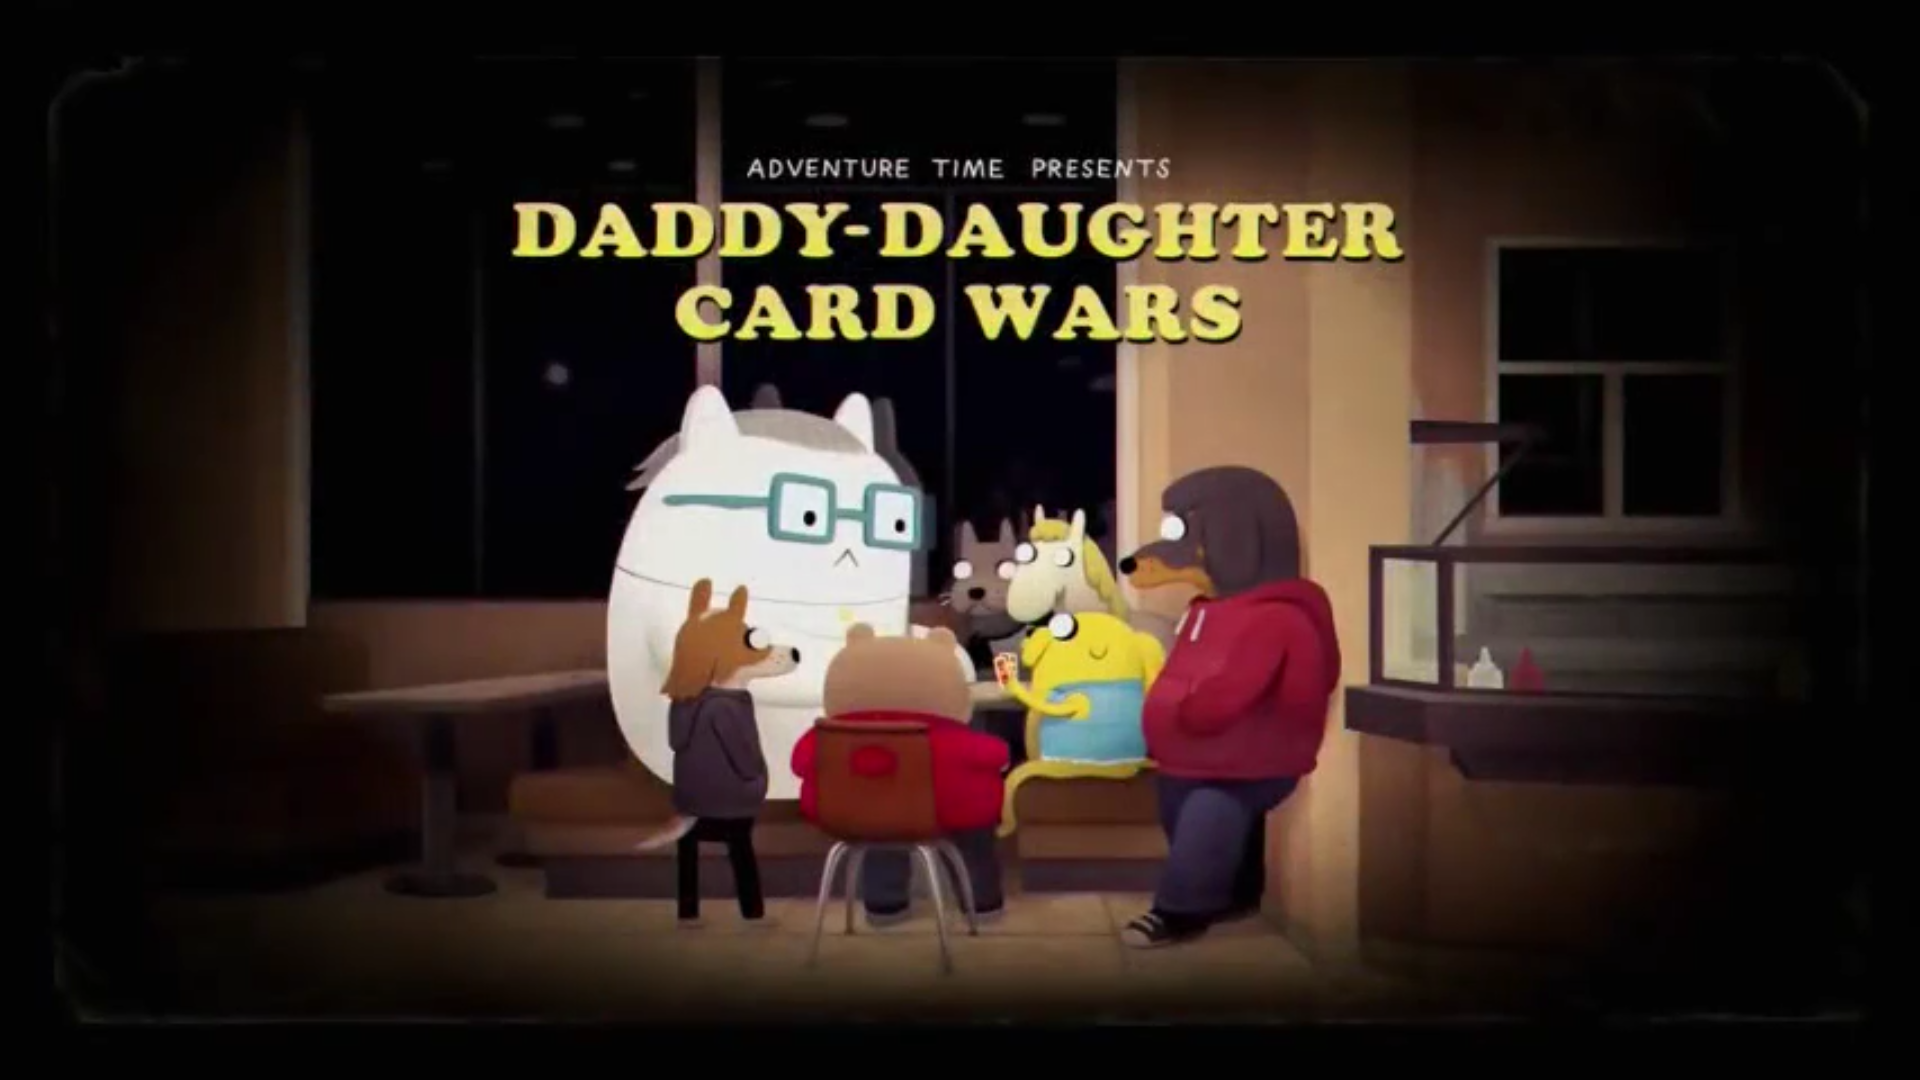 The title card for Jake's worse half comes out in "Daddy -Daughter Card Wars"